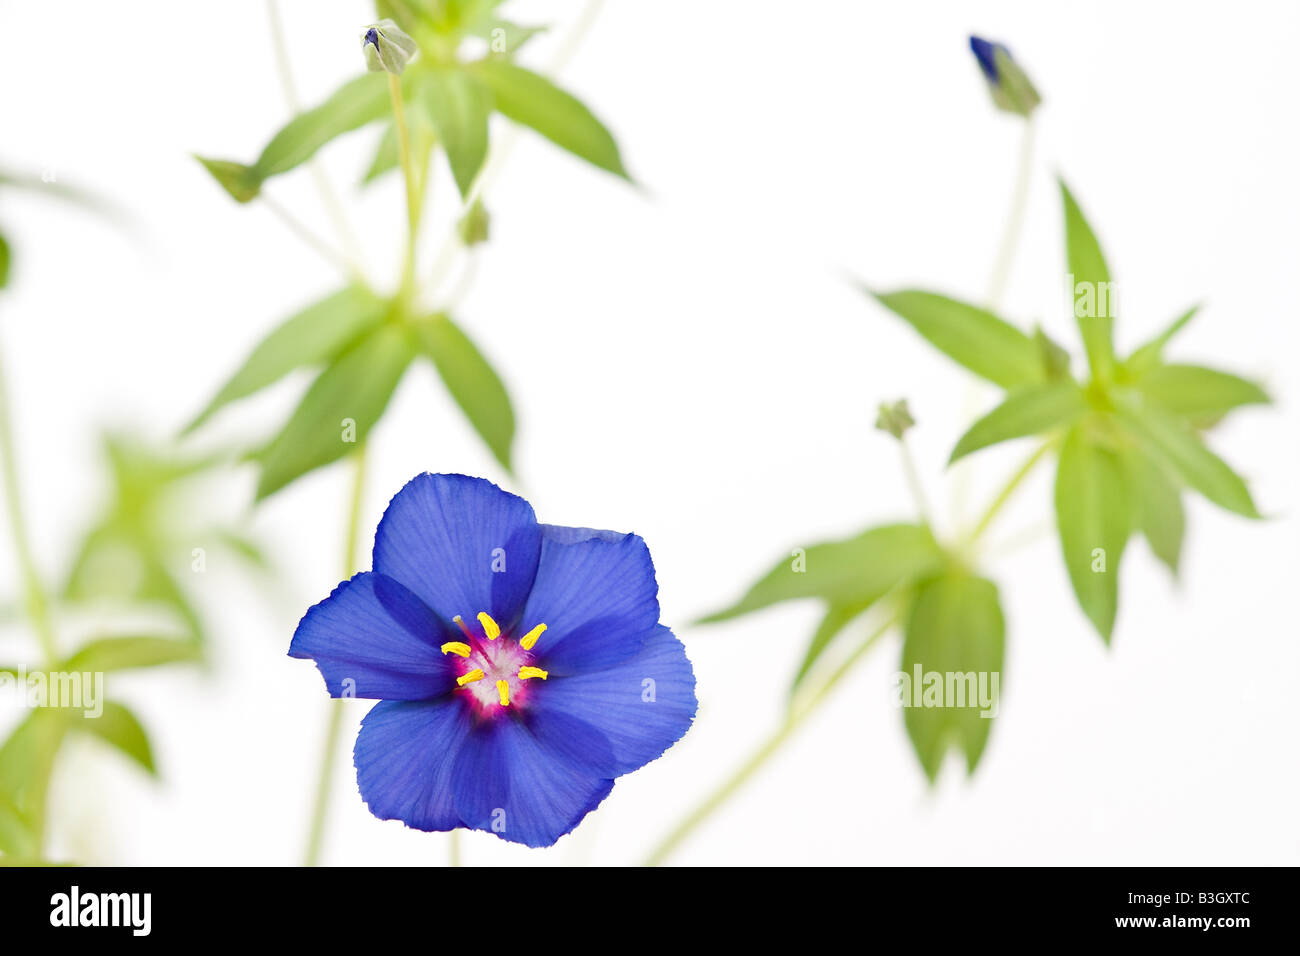 Anagallis monellii 'Skylover' or Blue Pimpernel plant in bloom against a white background Stock Photo